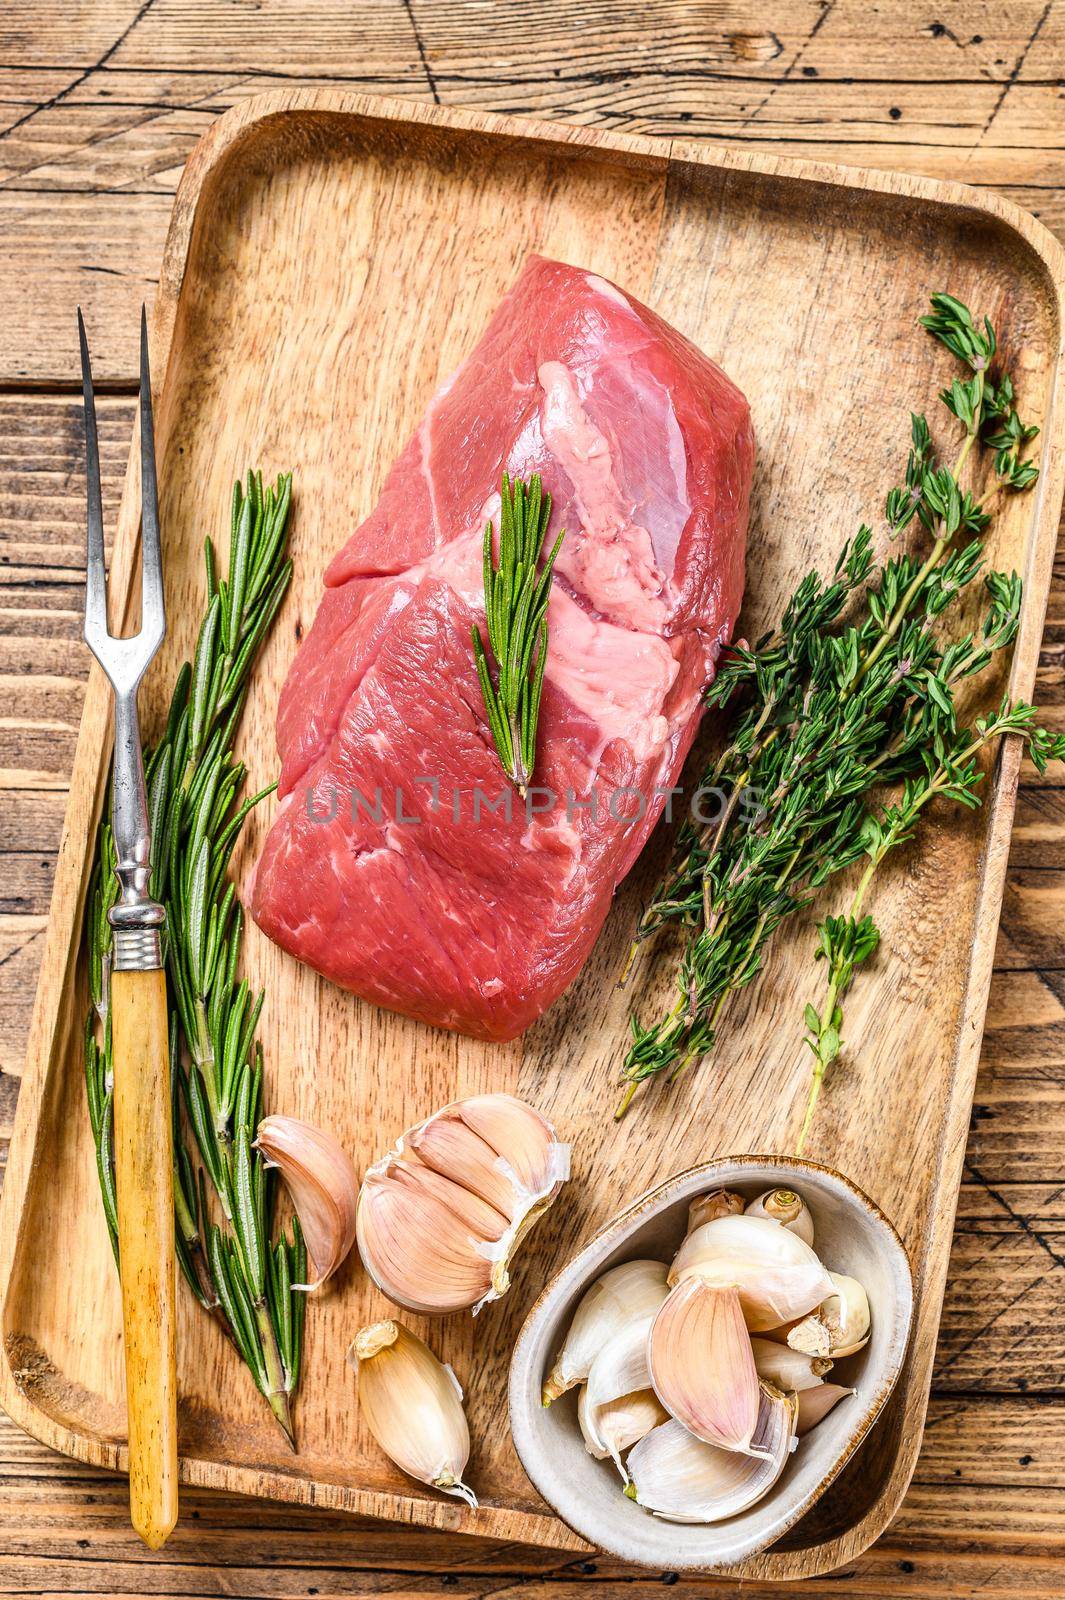 Raw lamb meat steak in a wooden tray with herbs. wooden background. Top view.